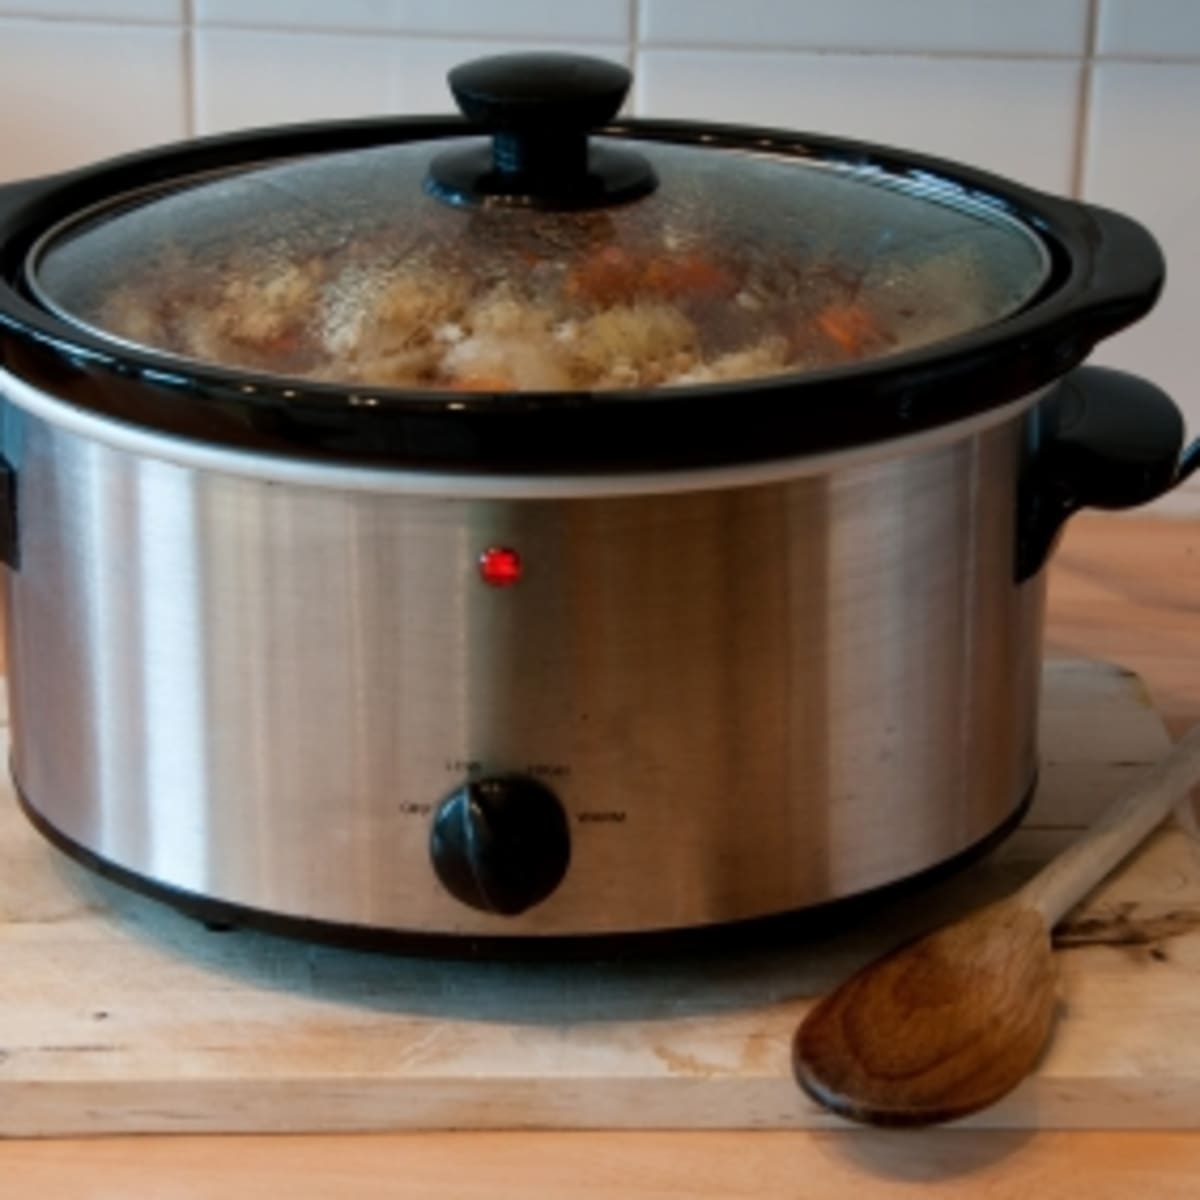 How Many Amps Does a Crock Pot Use? (Explained) - Conserve Energy Future